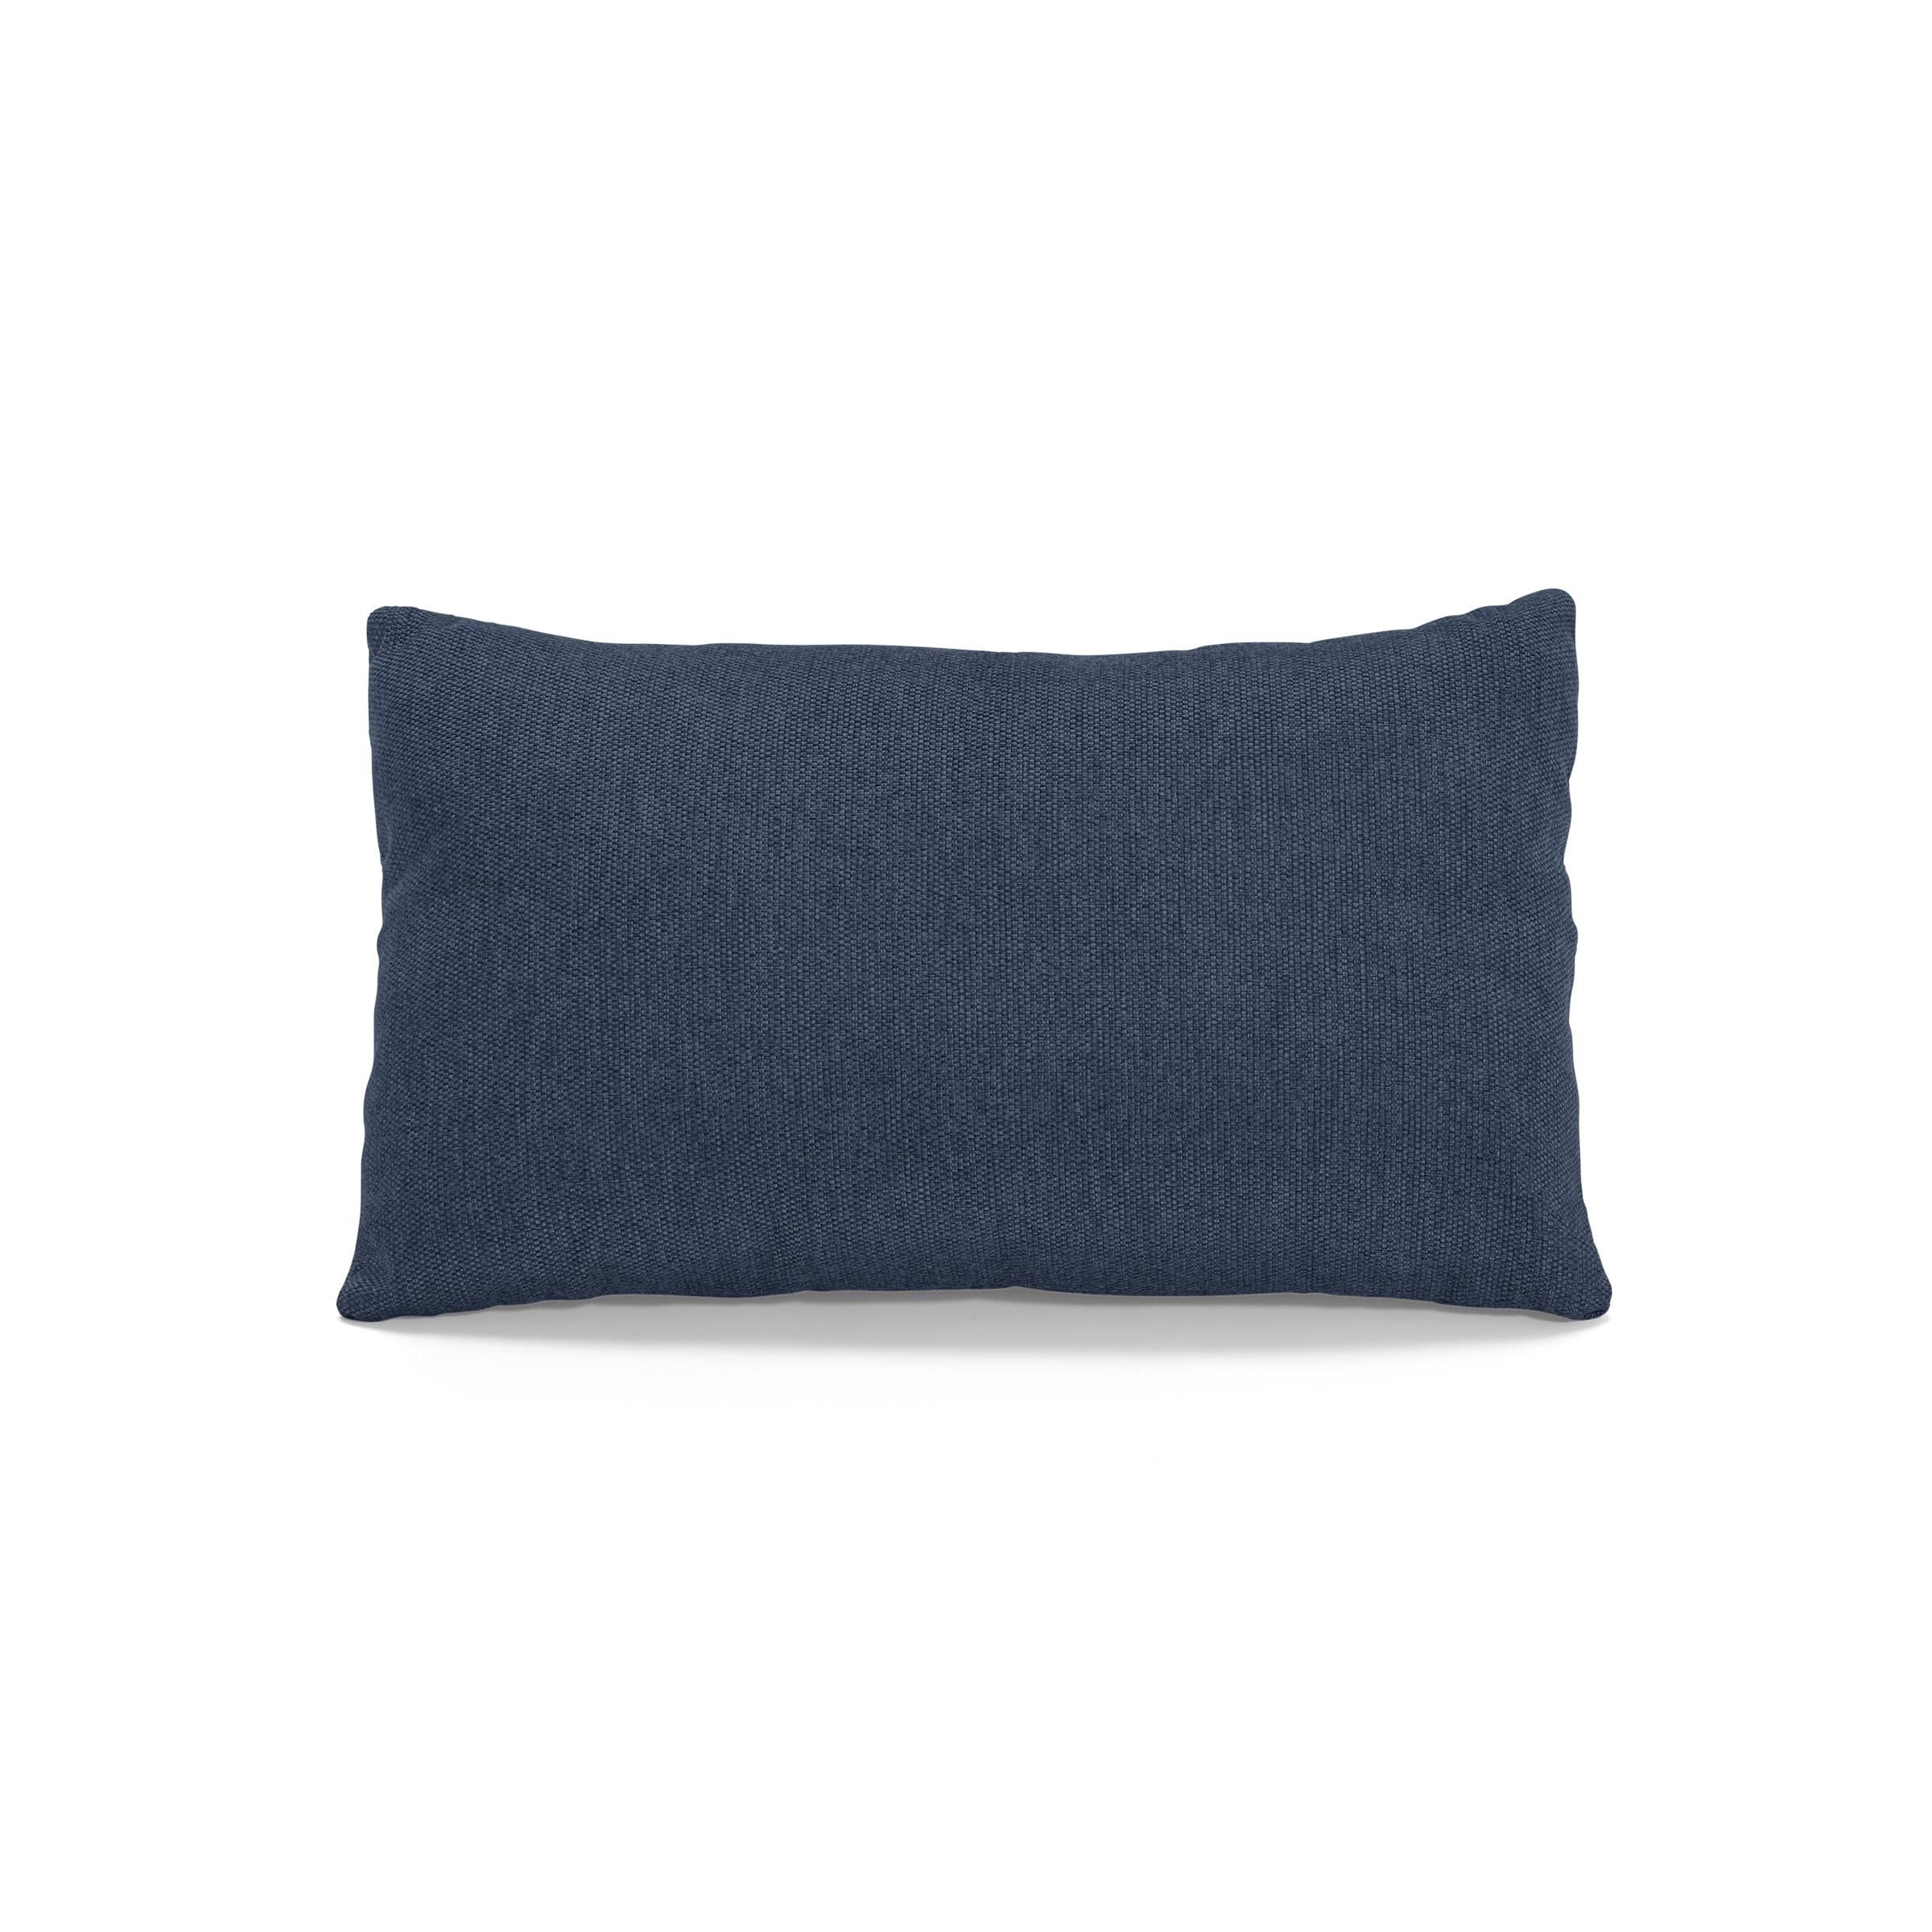 The Nomad Fabric Lumbar Pillow in Navy Blue